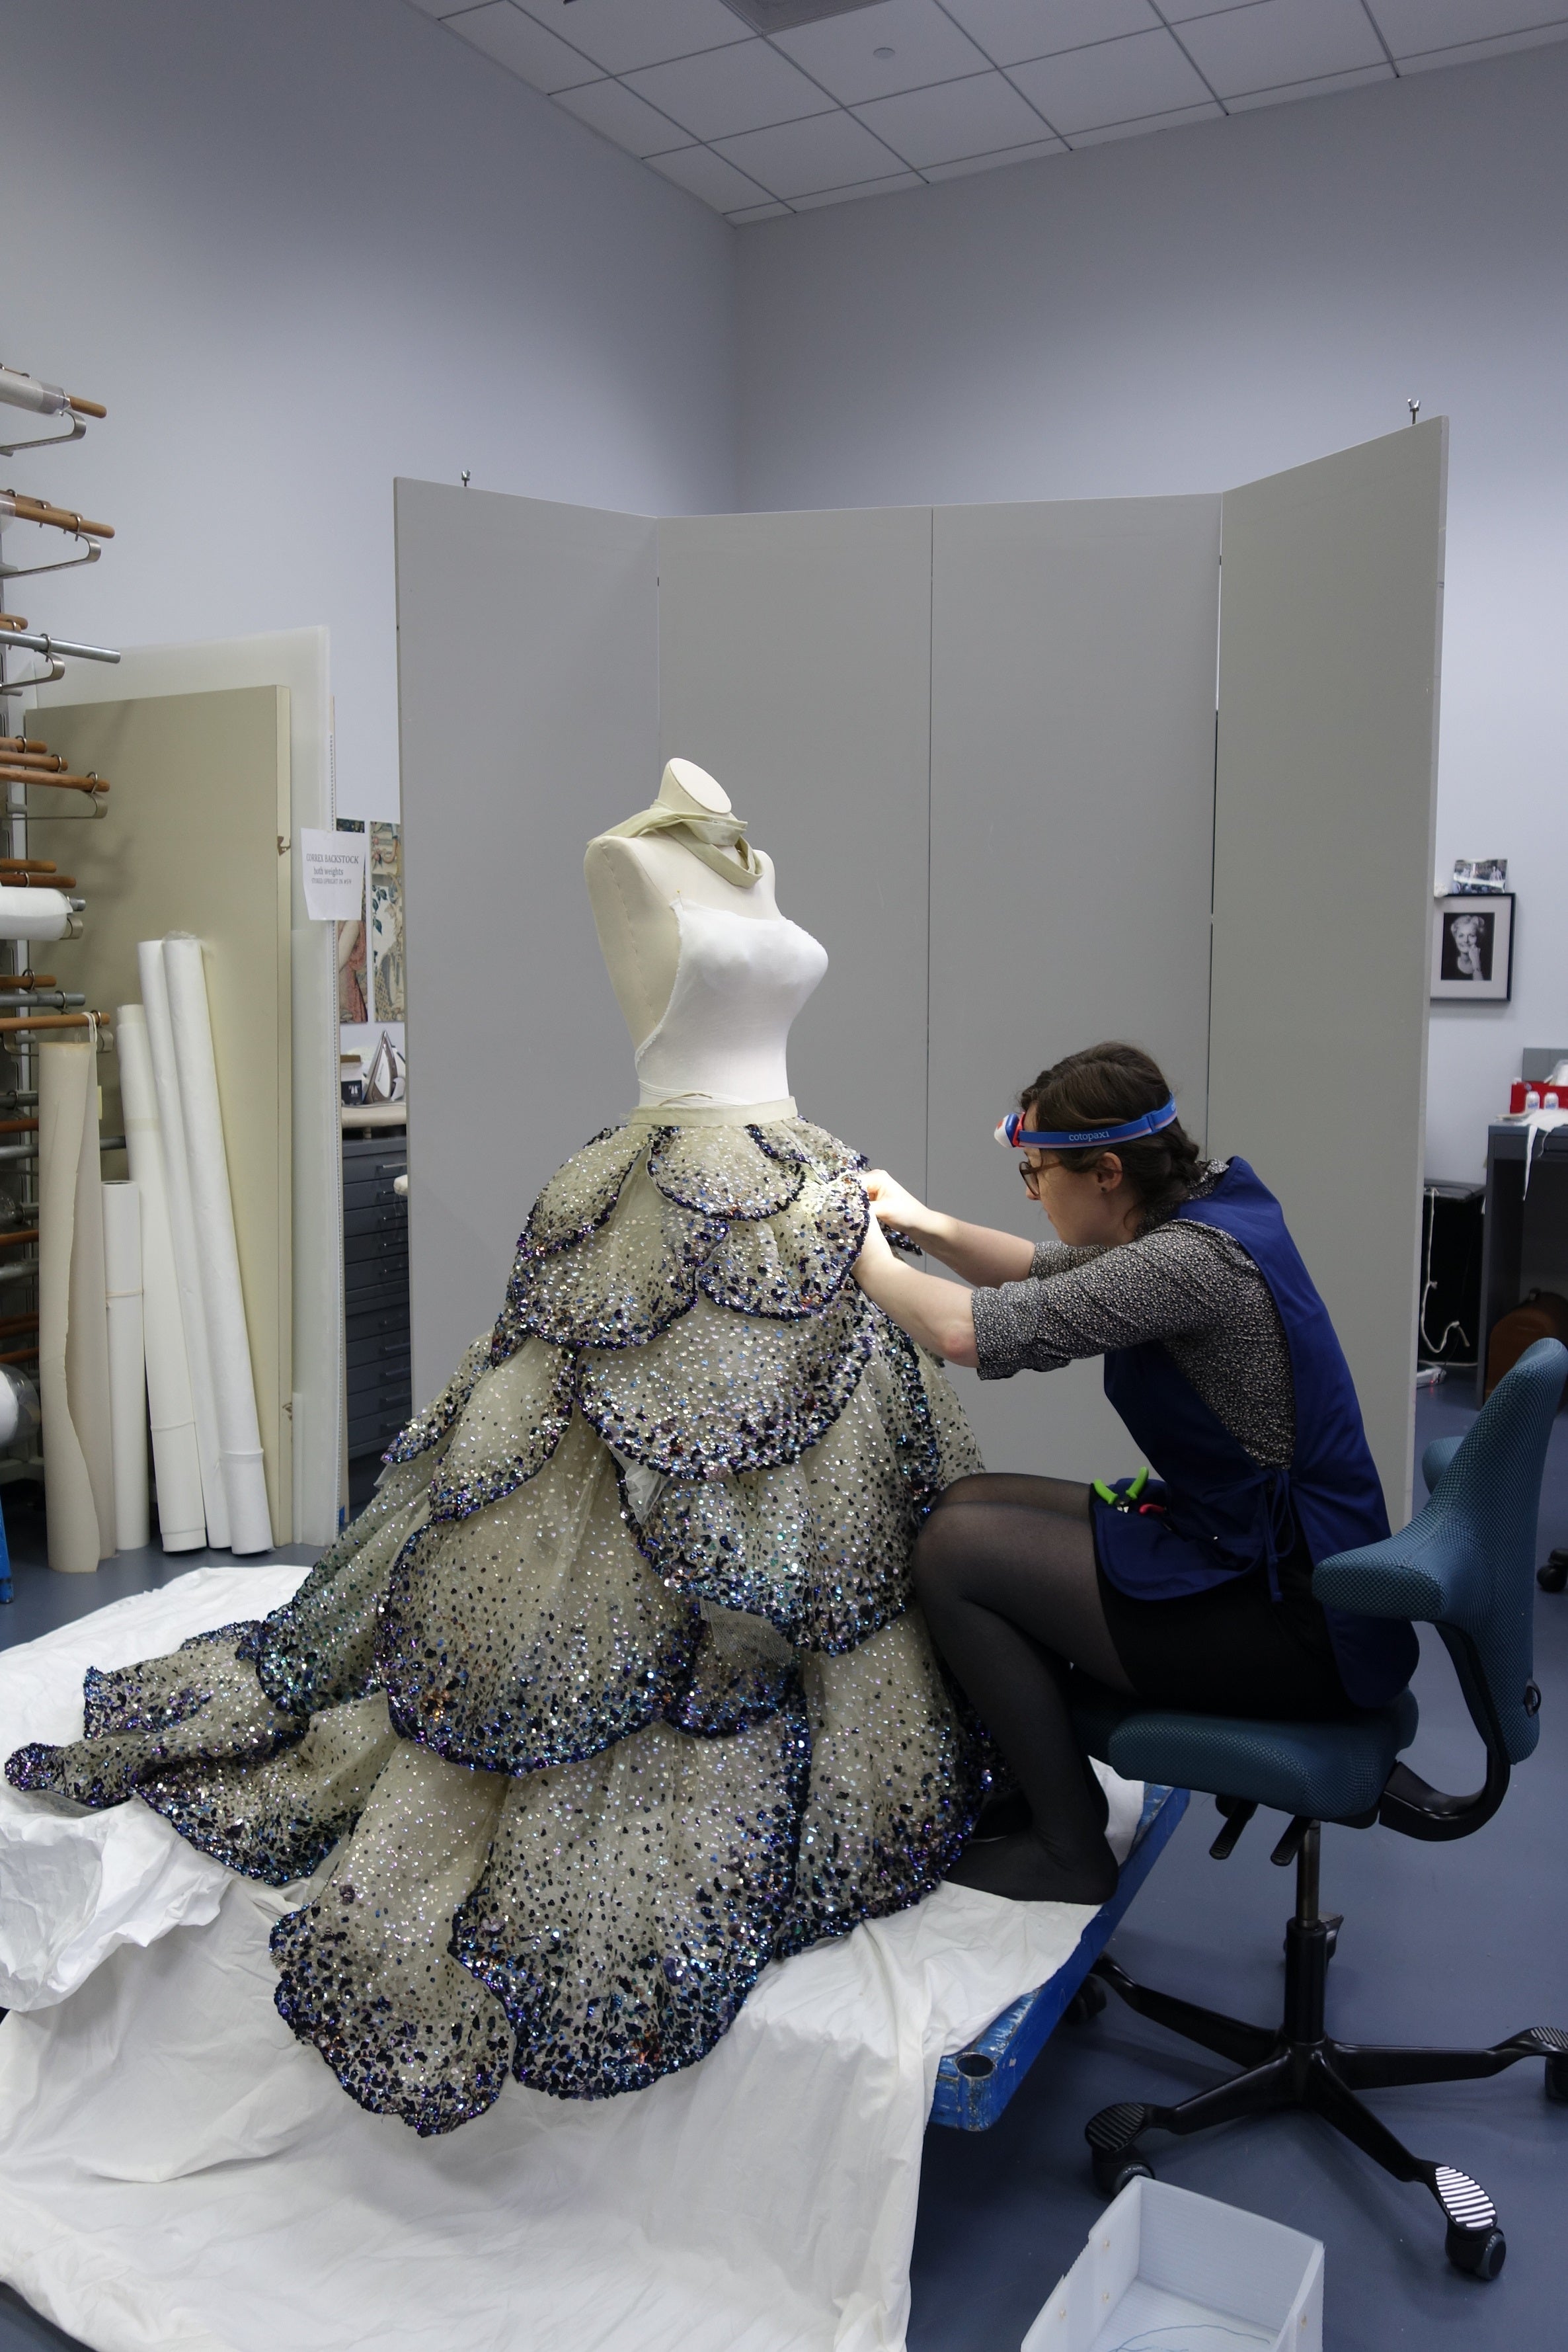 How Christian Dior was inspired to create Miss Dior by sibling who